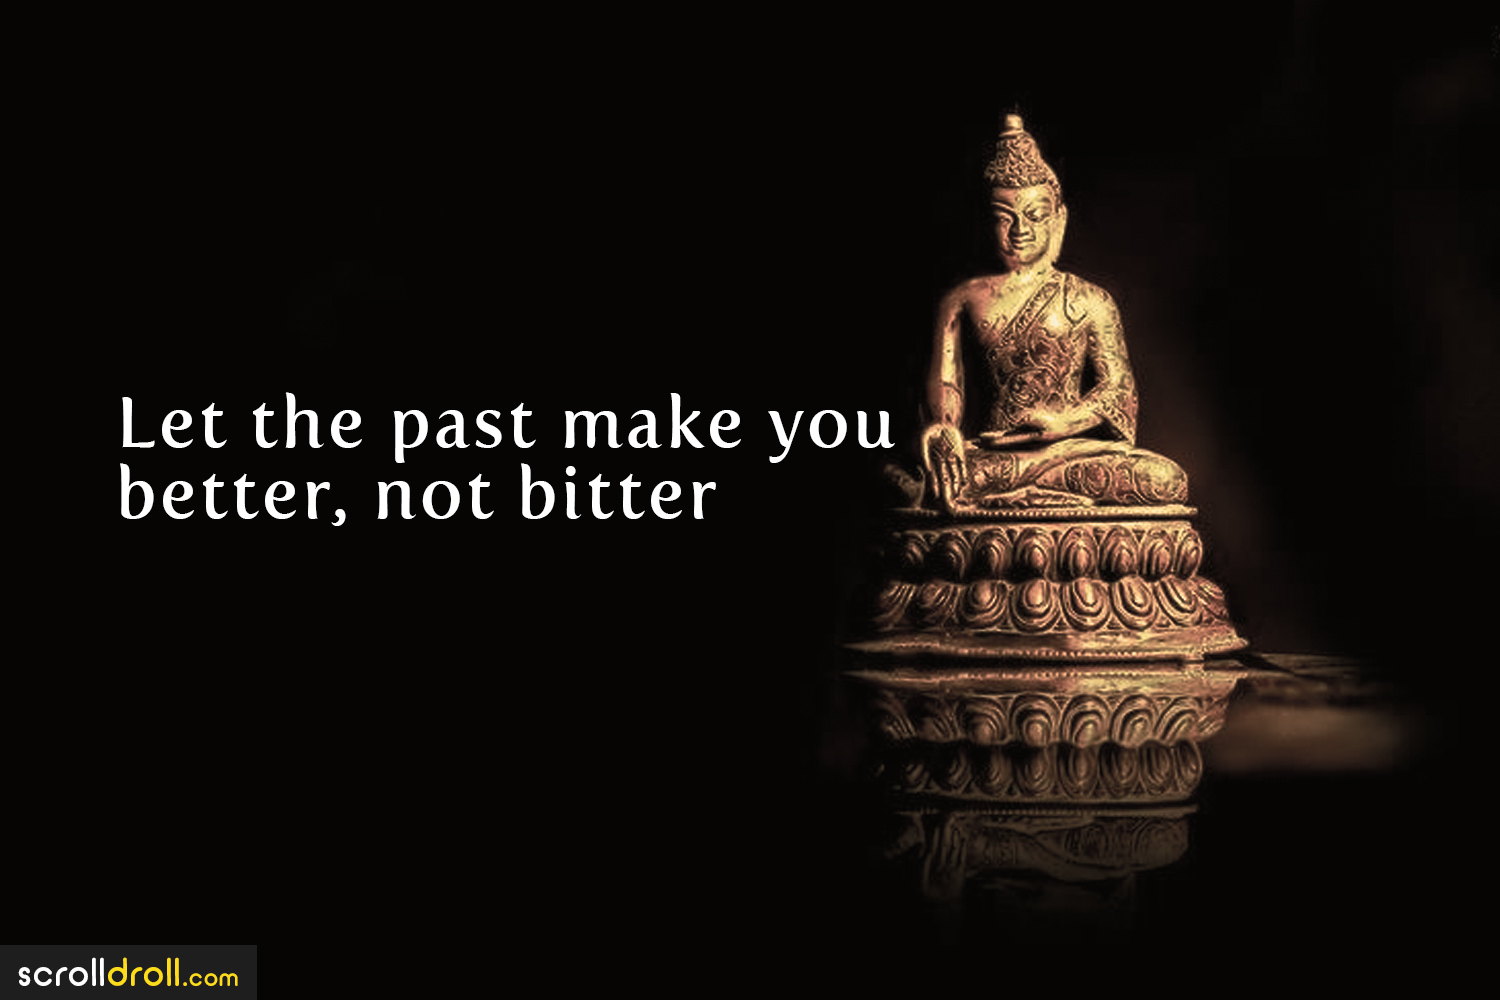 Gautam Buddha Quotes (15) - The Best of Indian Pop Culture ...